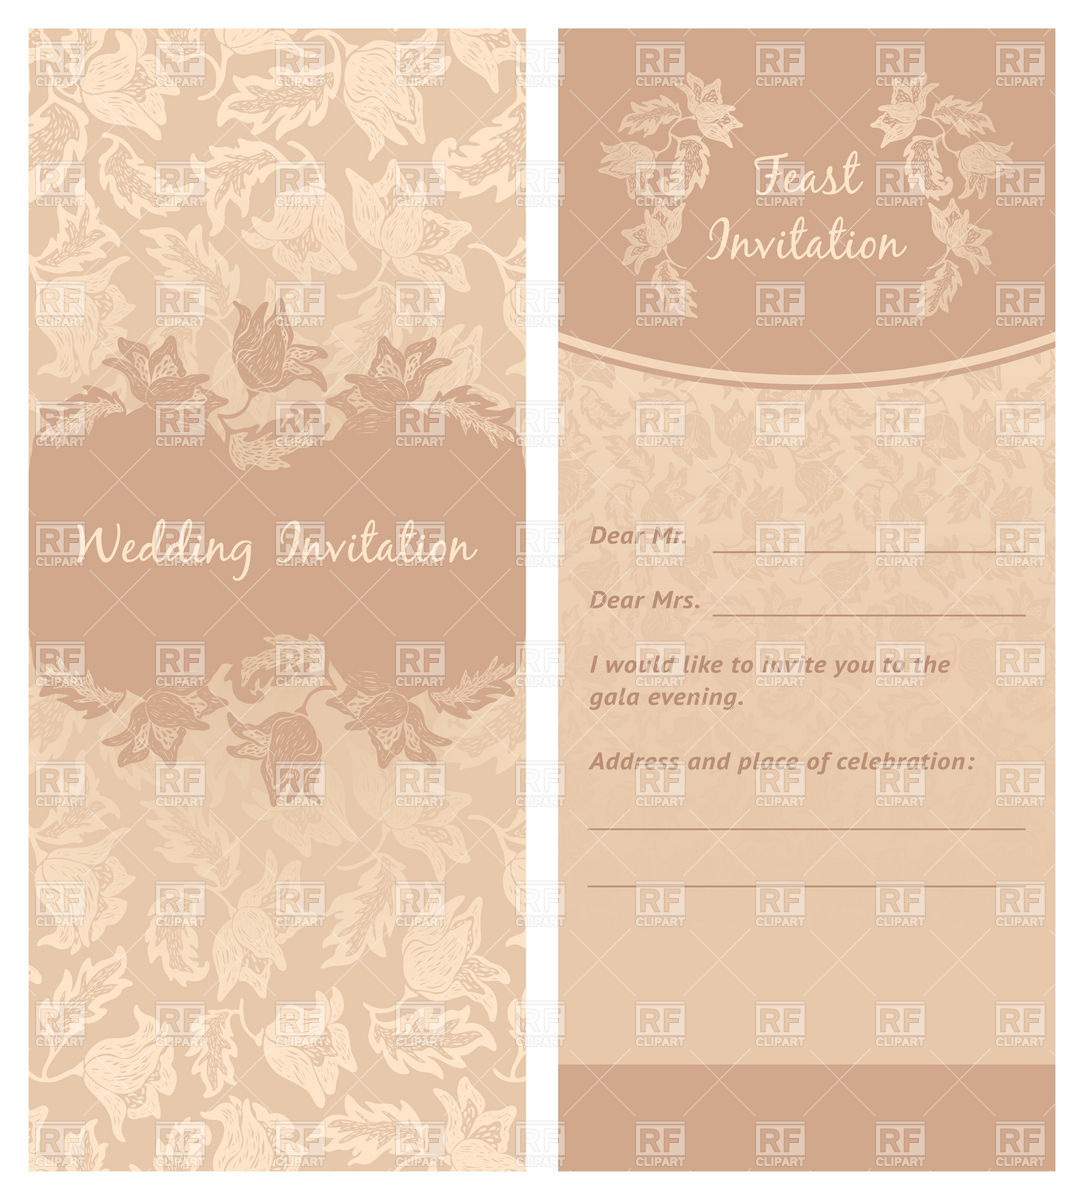 Ornate Brown Floral Wedding Invitation Template 18846 Borders And